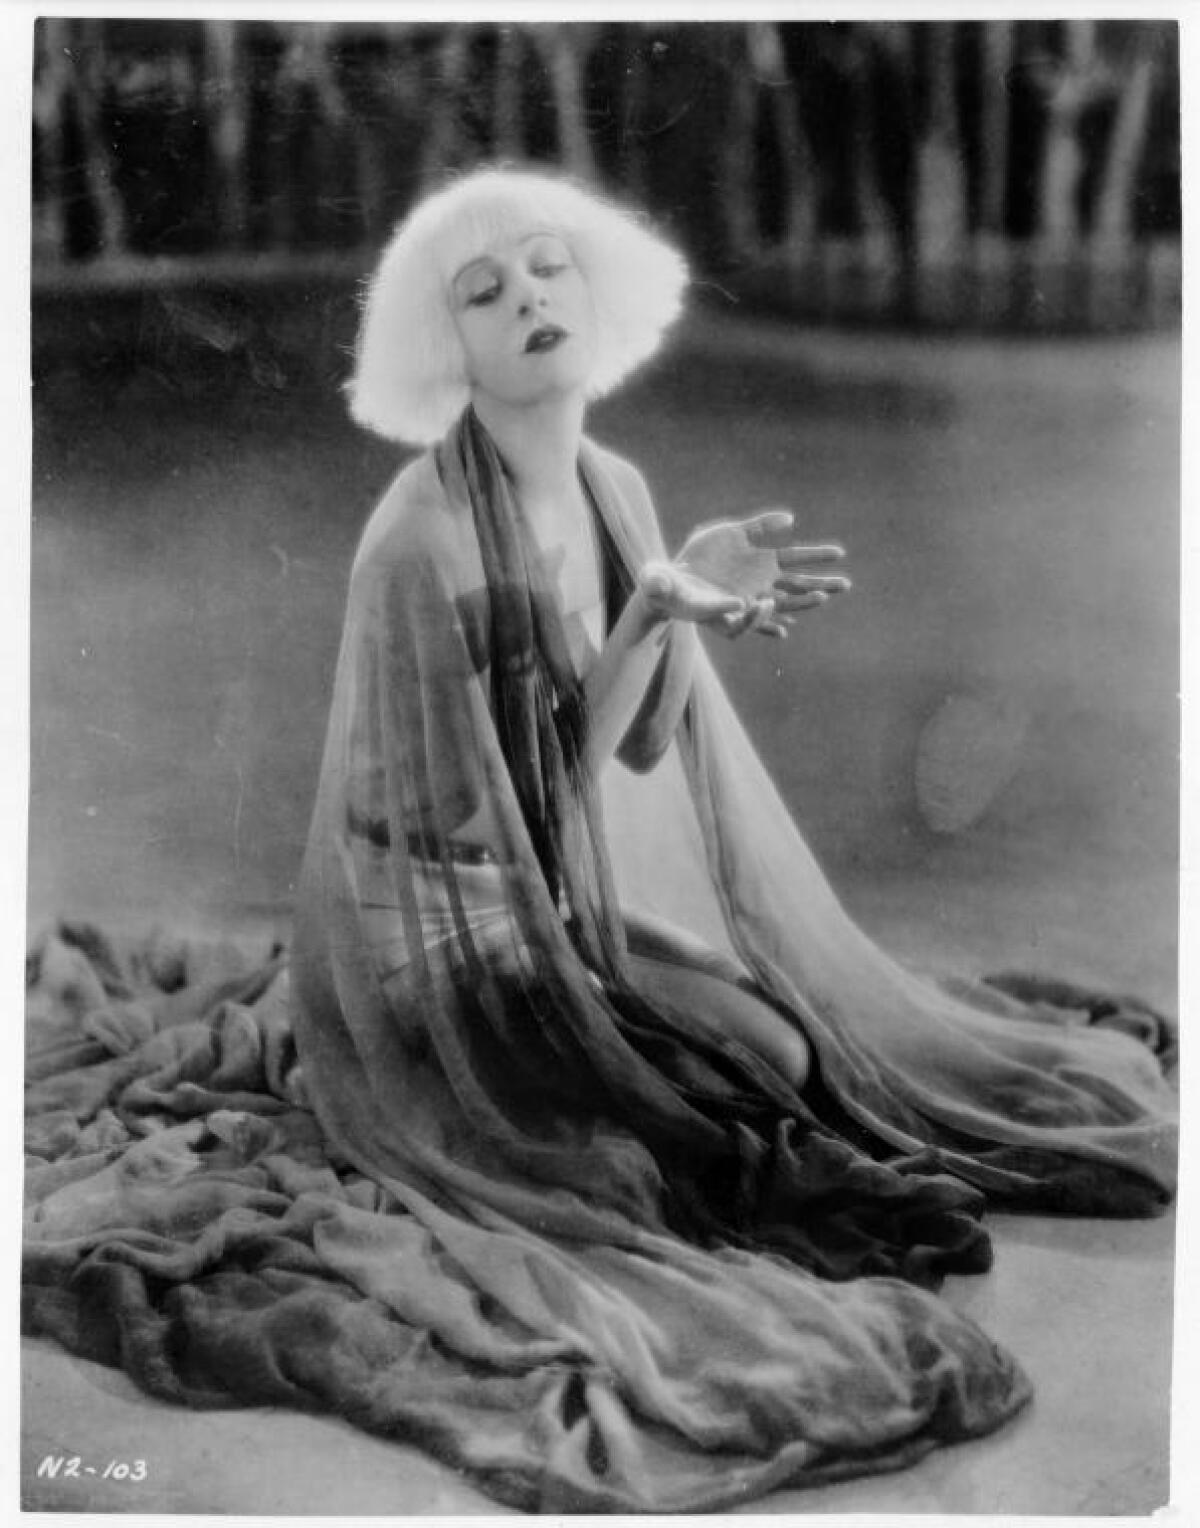 An image from the 1922 film "Salomé."